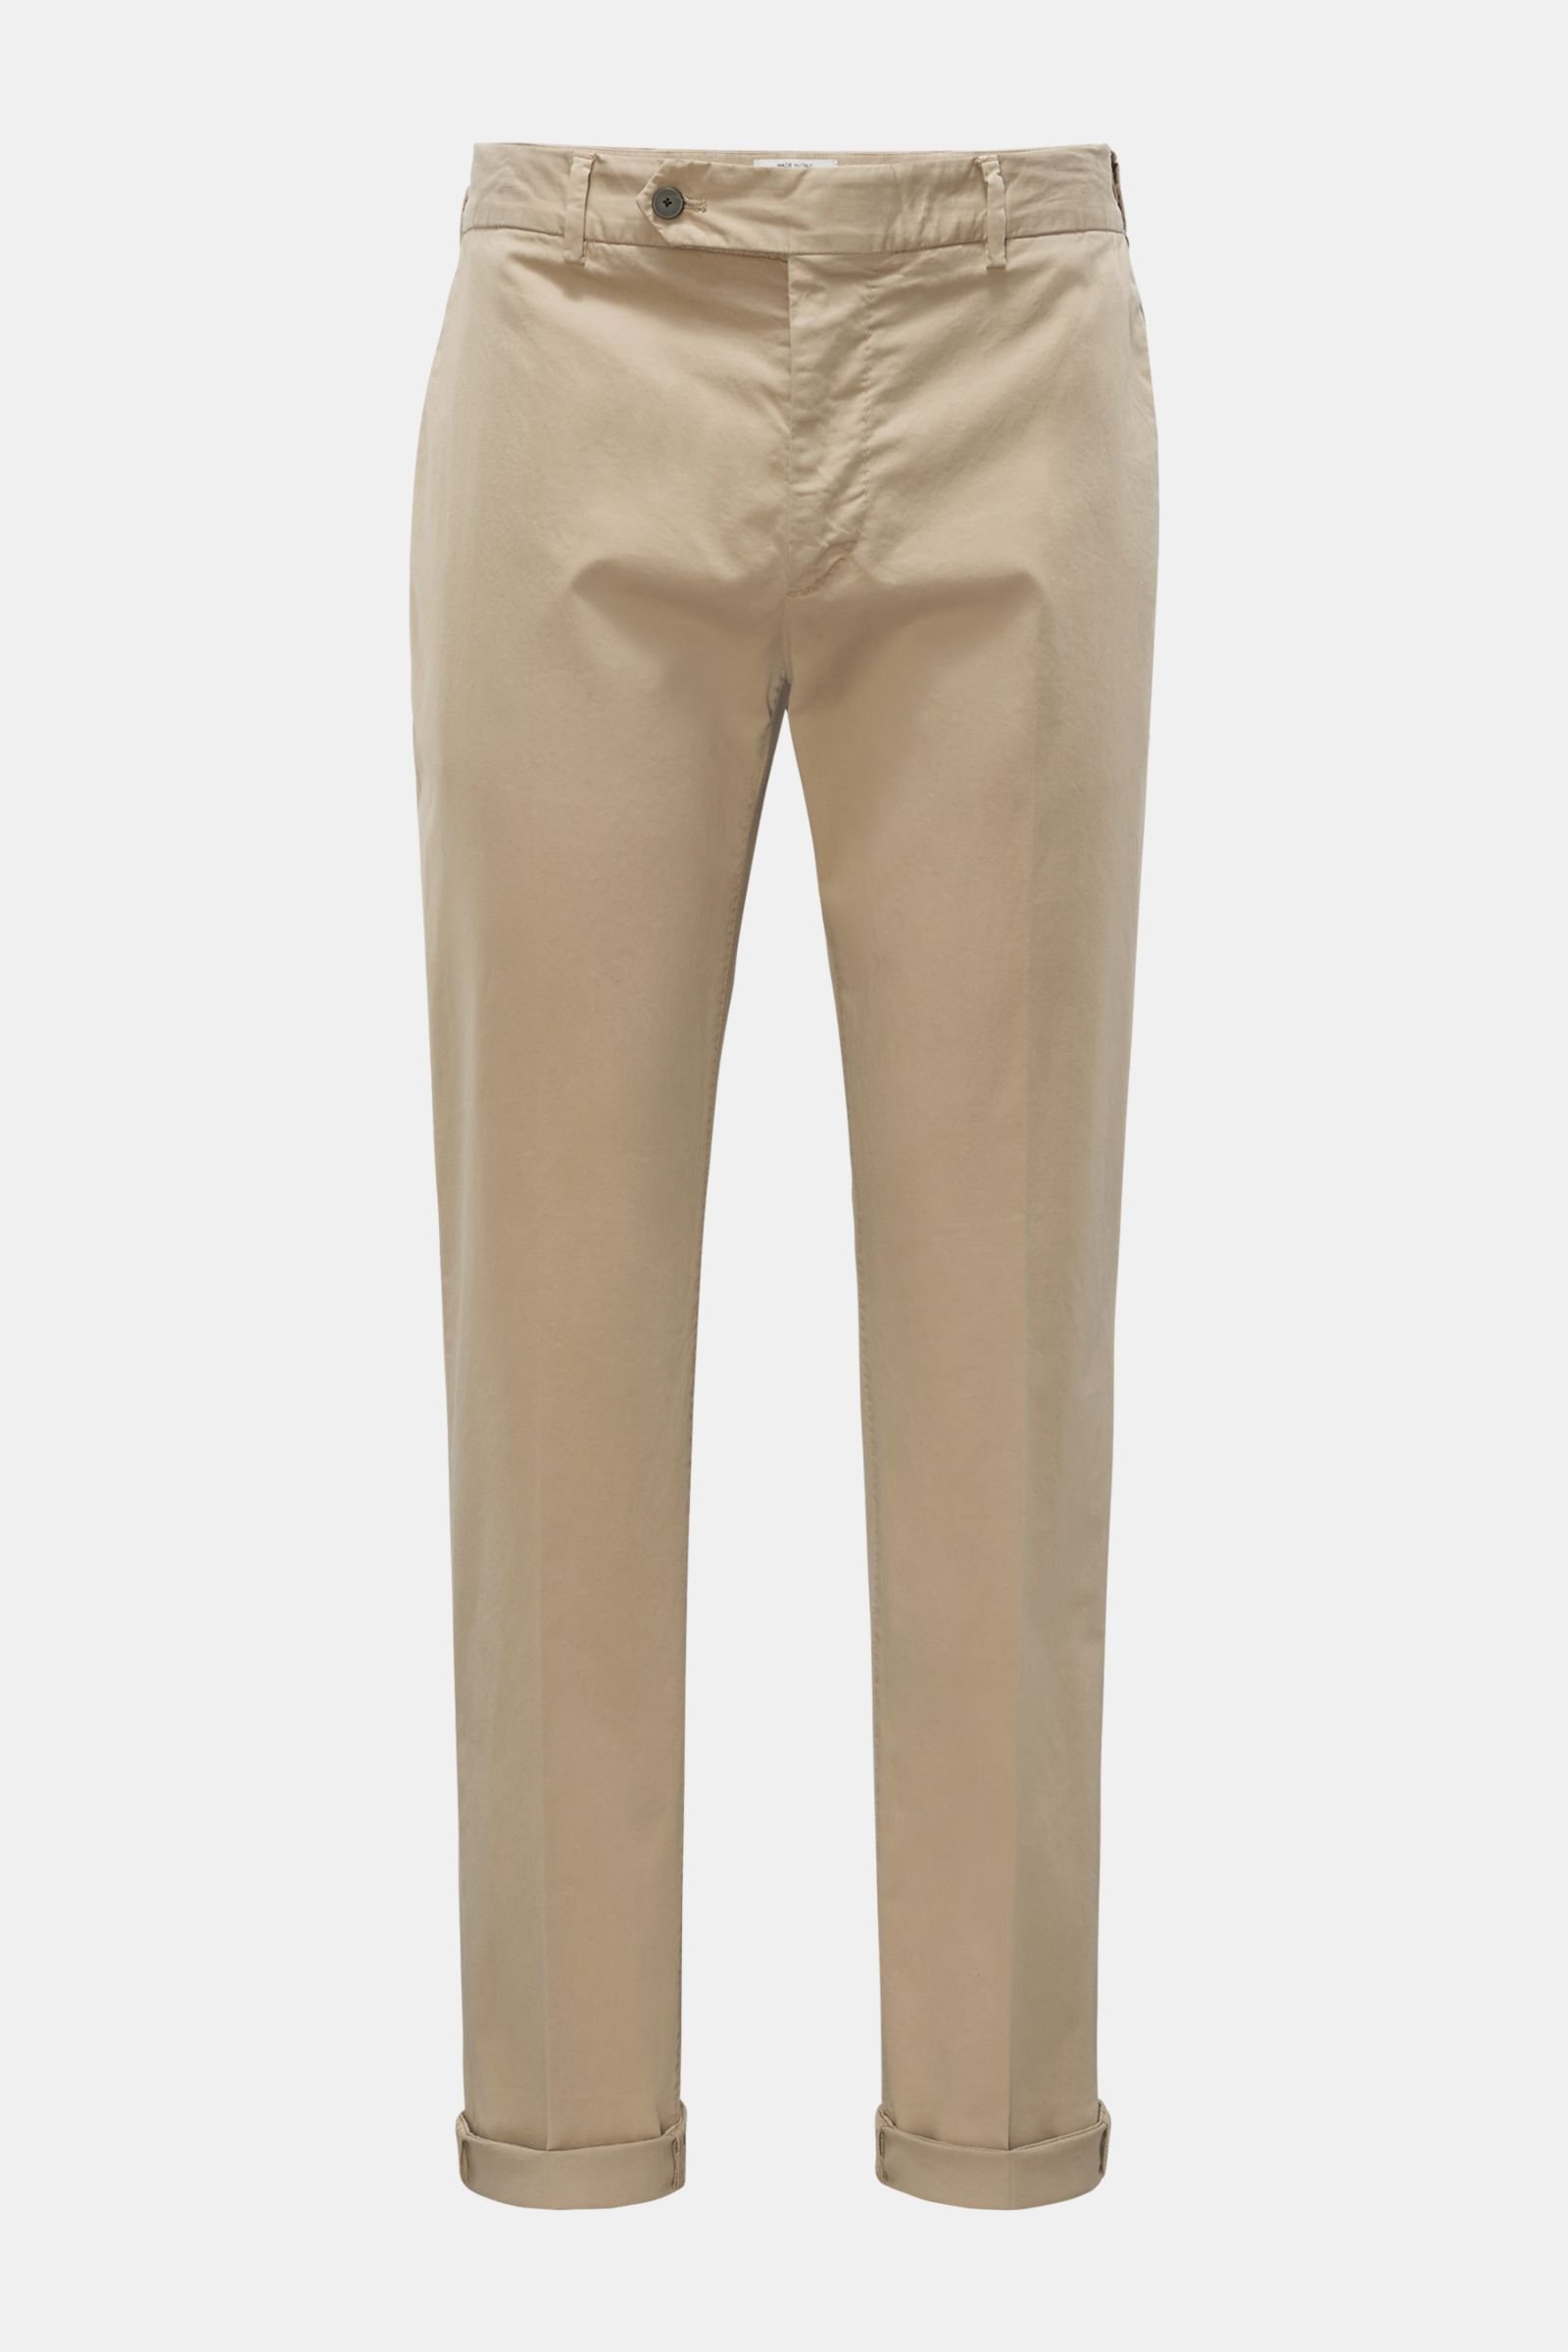 Cotton trousers 'Paloma' light brown